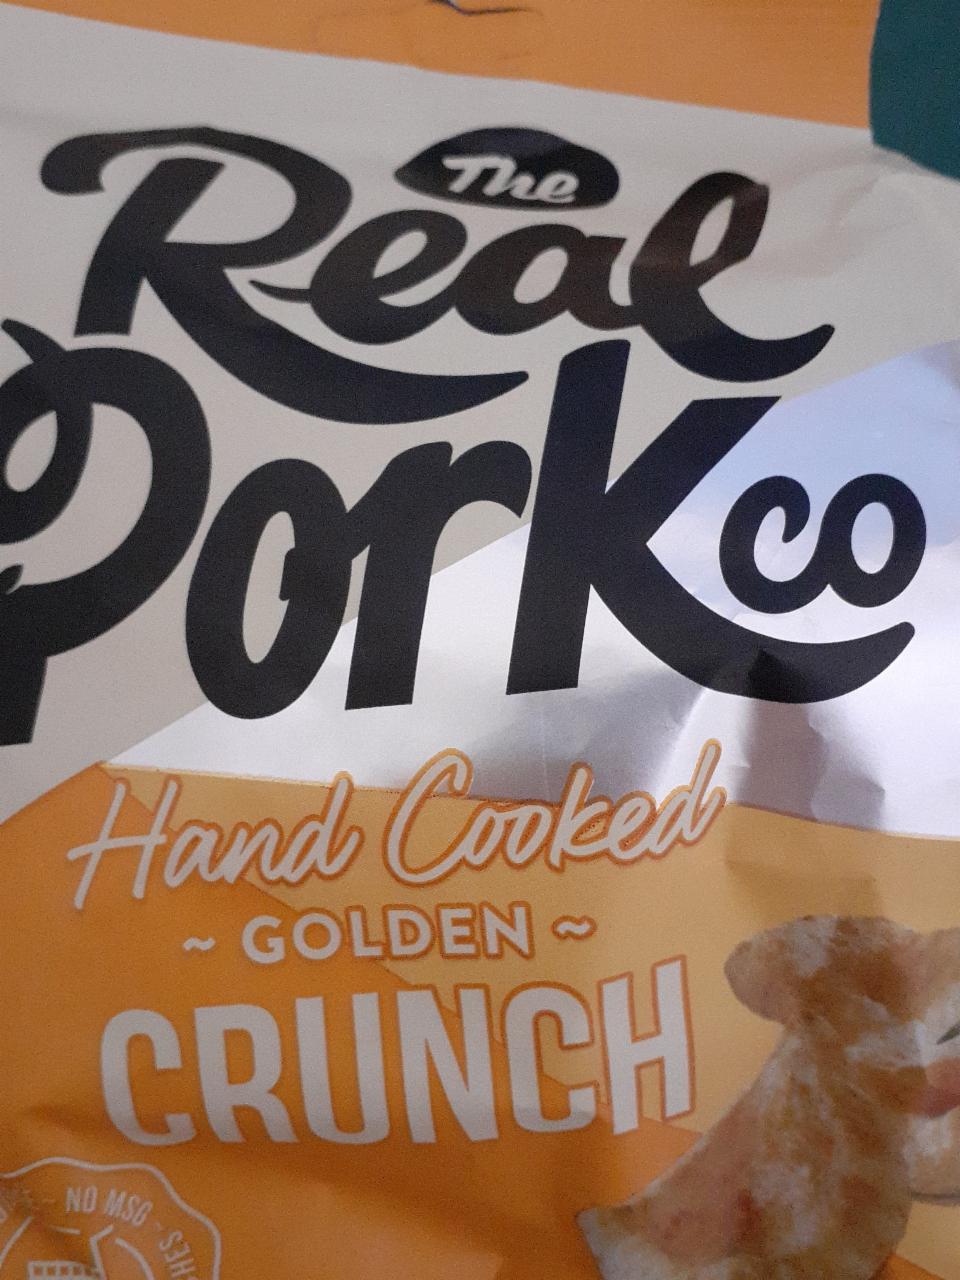 Fotografie - Hand Cooked Golden Crunch The Real Pork Co